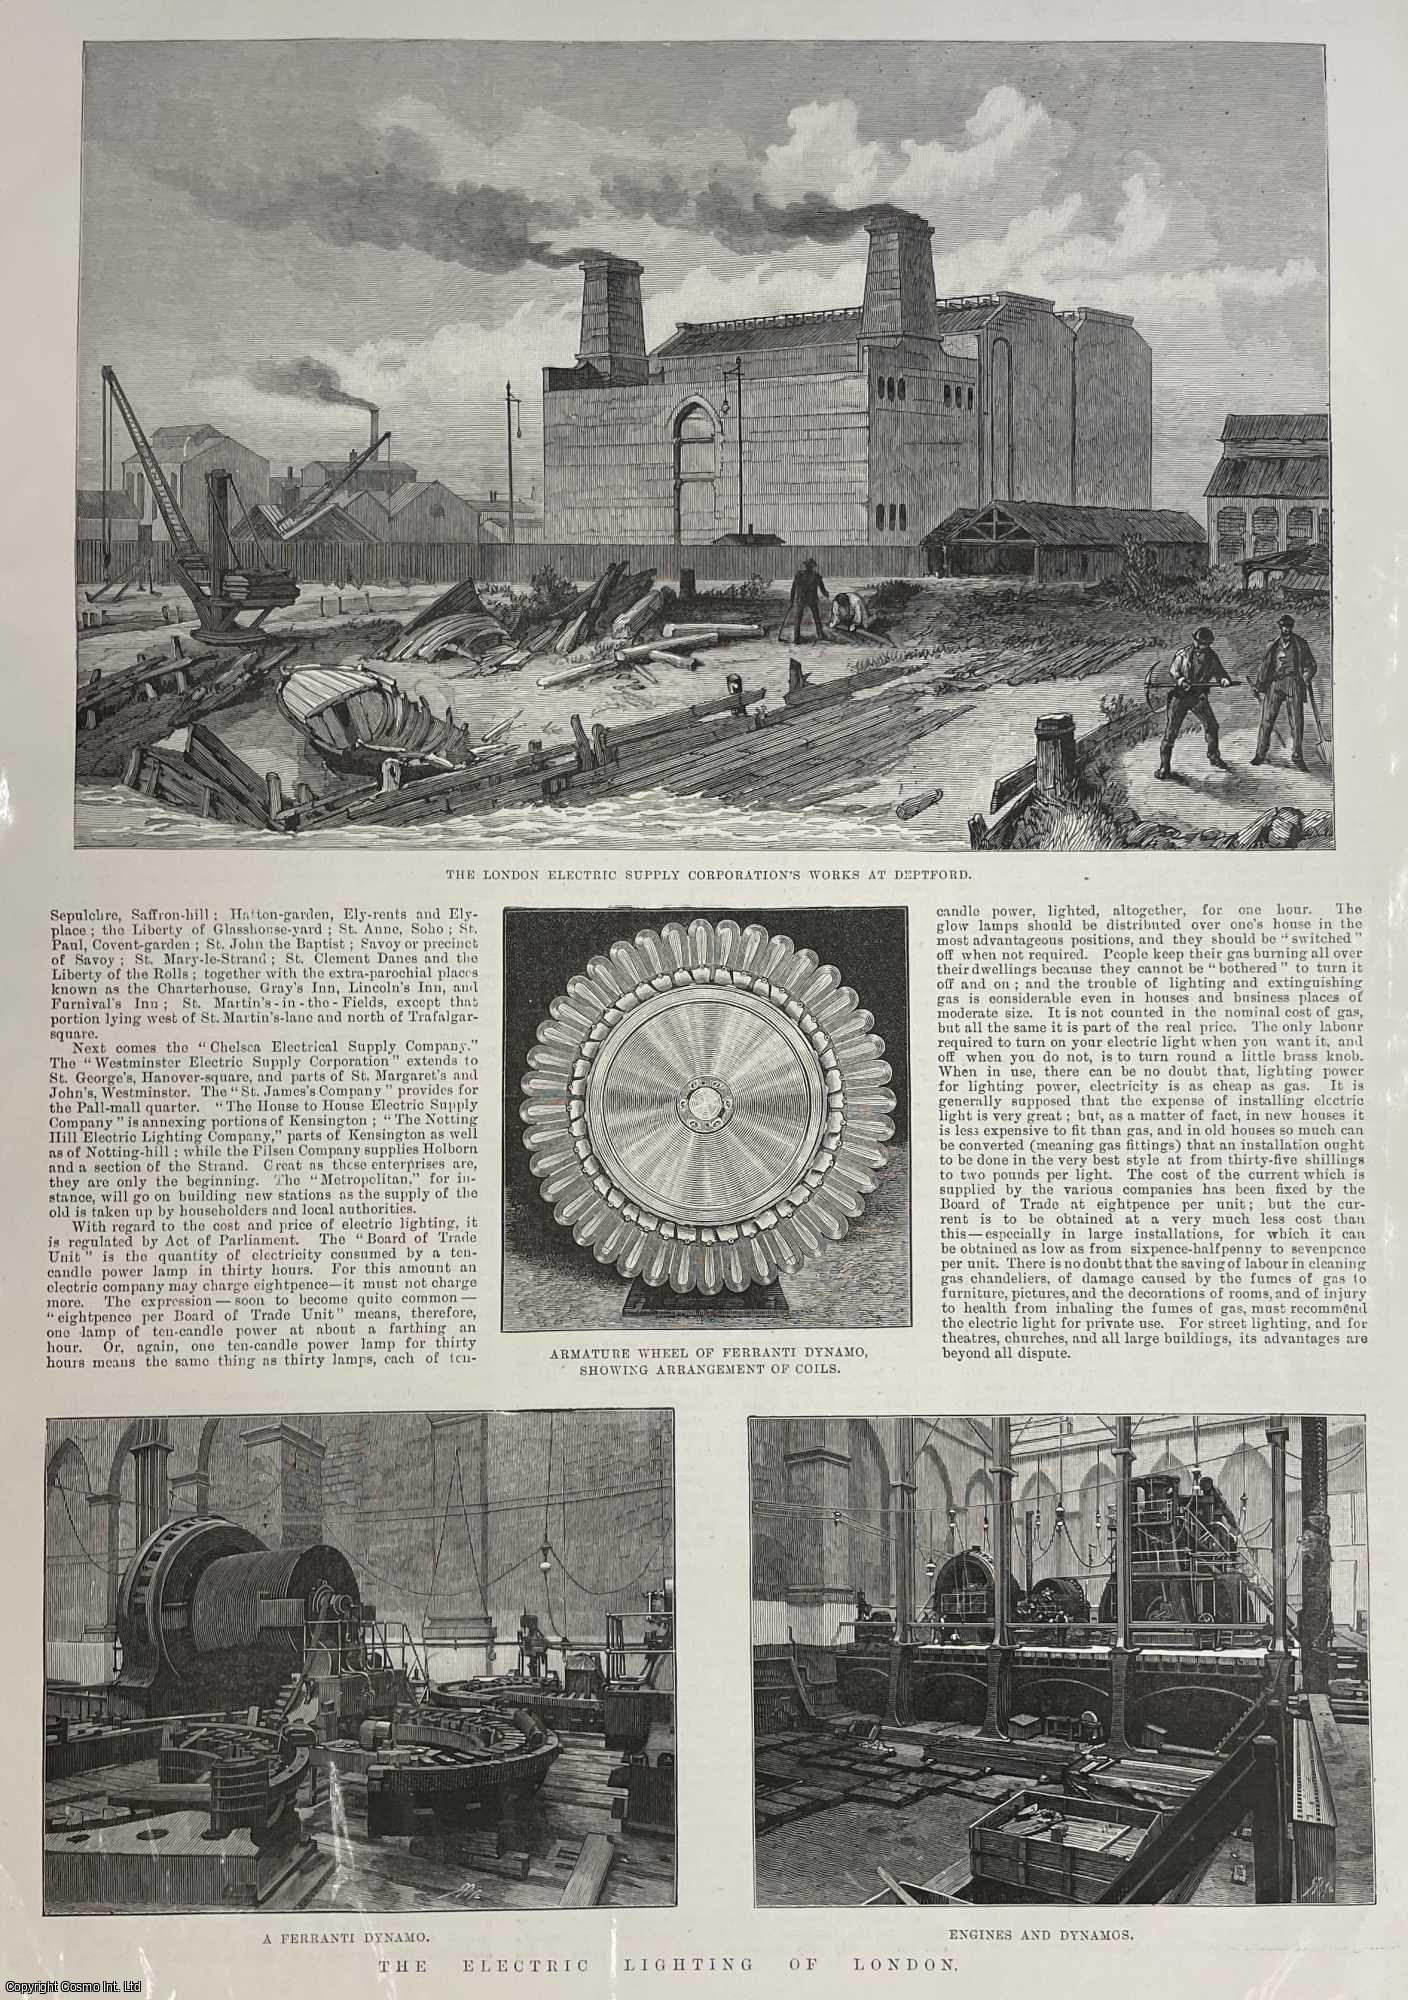 ELECTRICITY - The Electric Lighting of London; The London Electric Supply Corporation's Works at Deptford, A Ferranti Dynamo etc. An original print from the Illustrated London News, 1889.